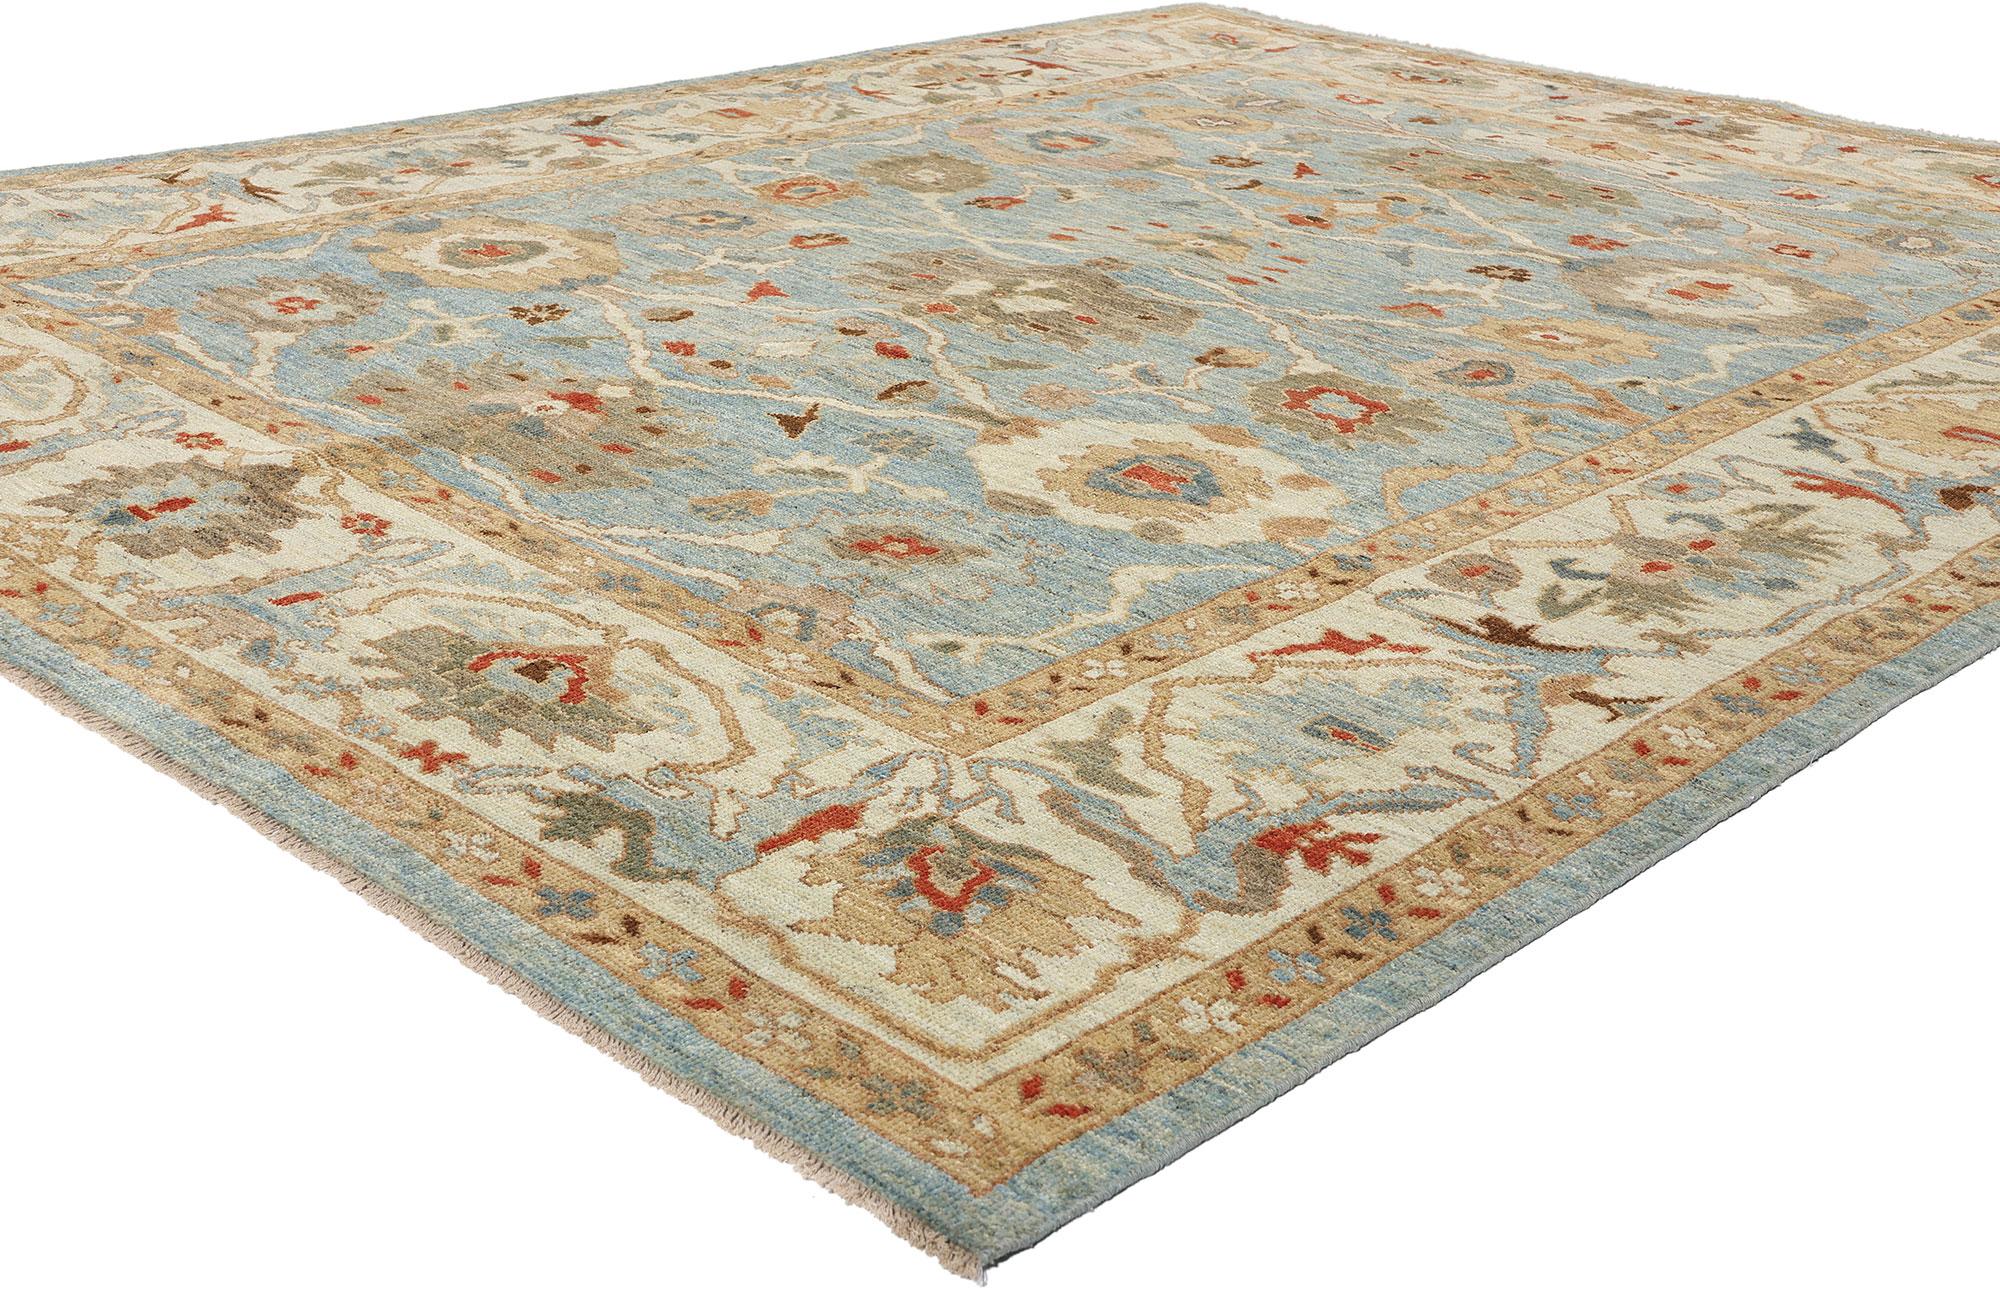 61283 Modern Sky Blue Persian Sultanabad Rug, 08'06 x 10'09. Originating in Iran's Sultanabad region, Persian Sultanabad rugs inspire admiration for their exceptional craftsmanship, enduring materials, and exquisite artistry. Woven with meticulous